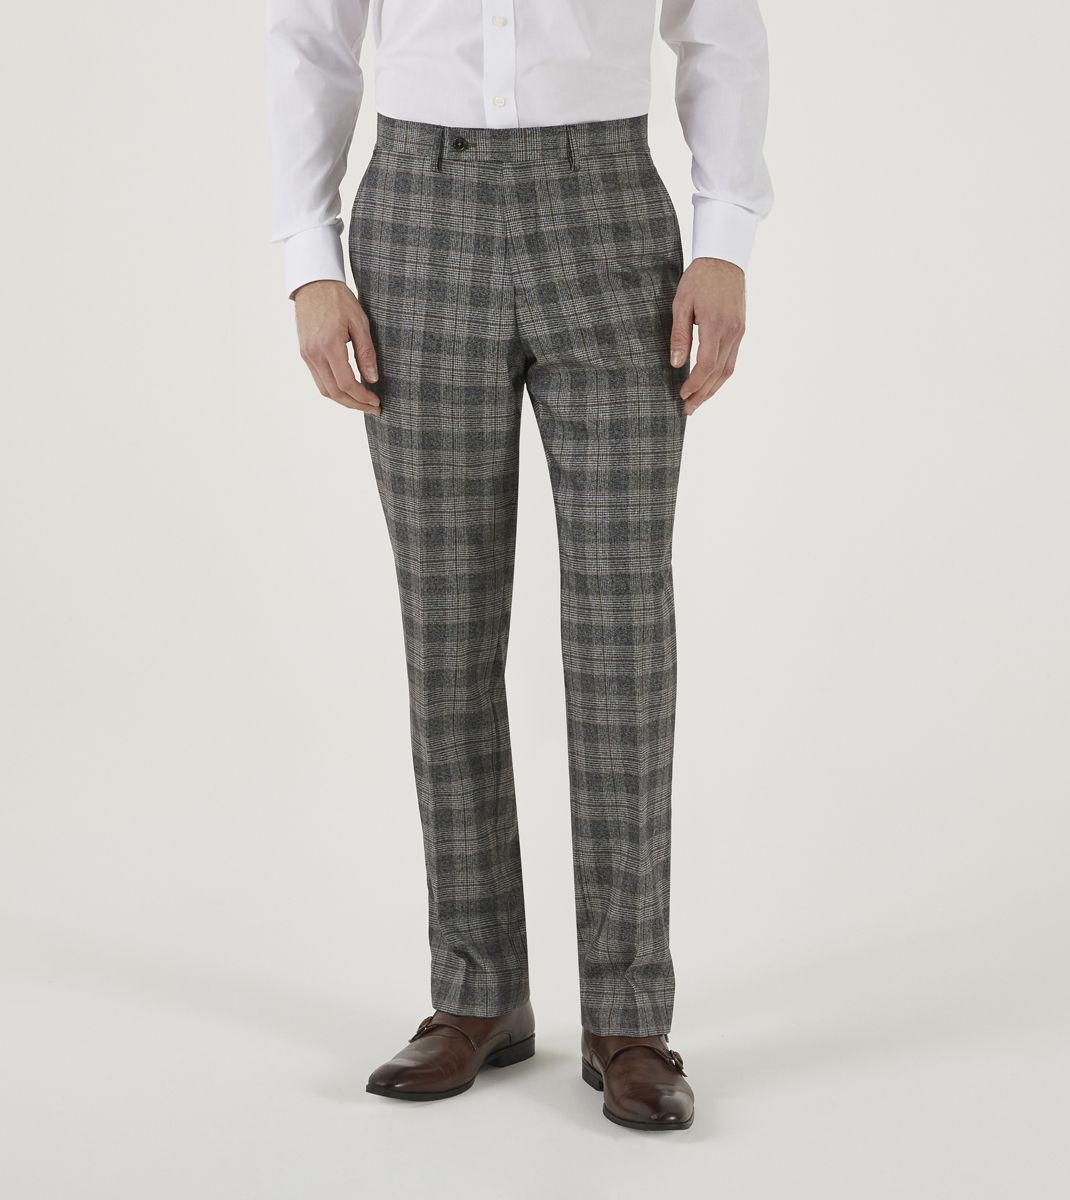 Skopes Tatton Grey & Brown Check Tailored Trousers